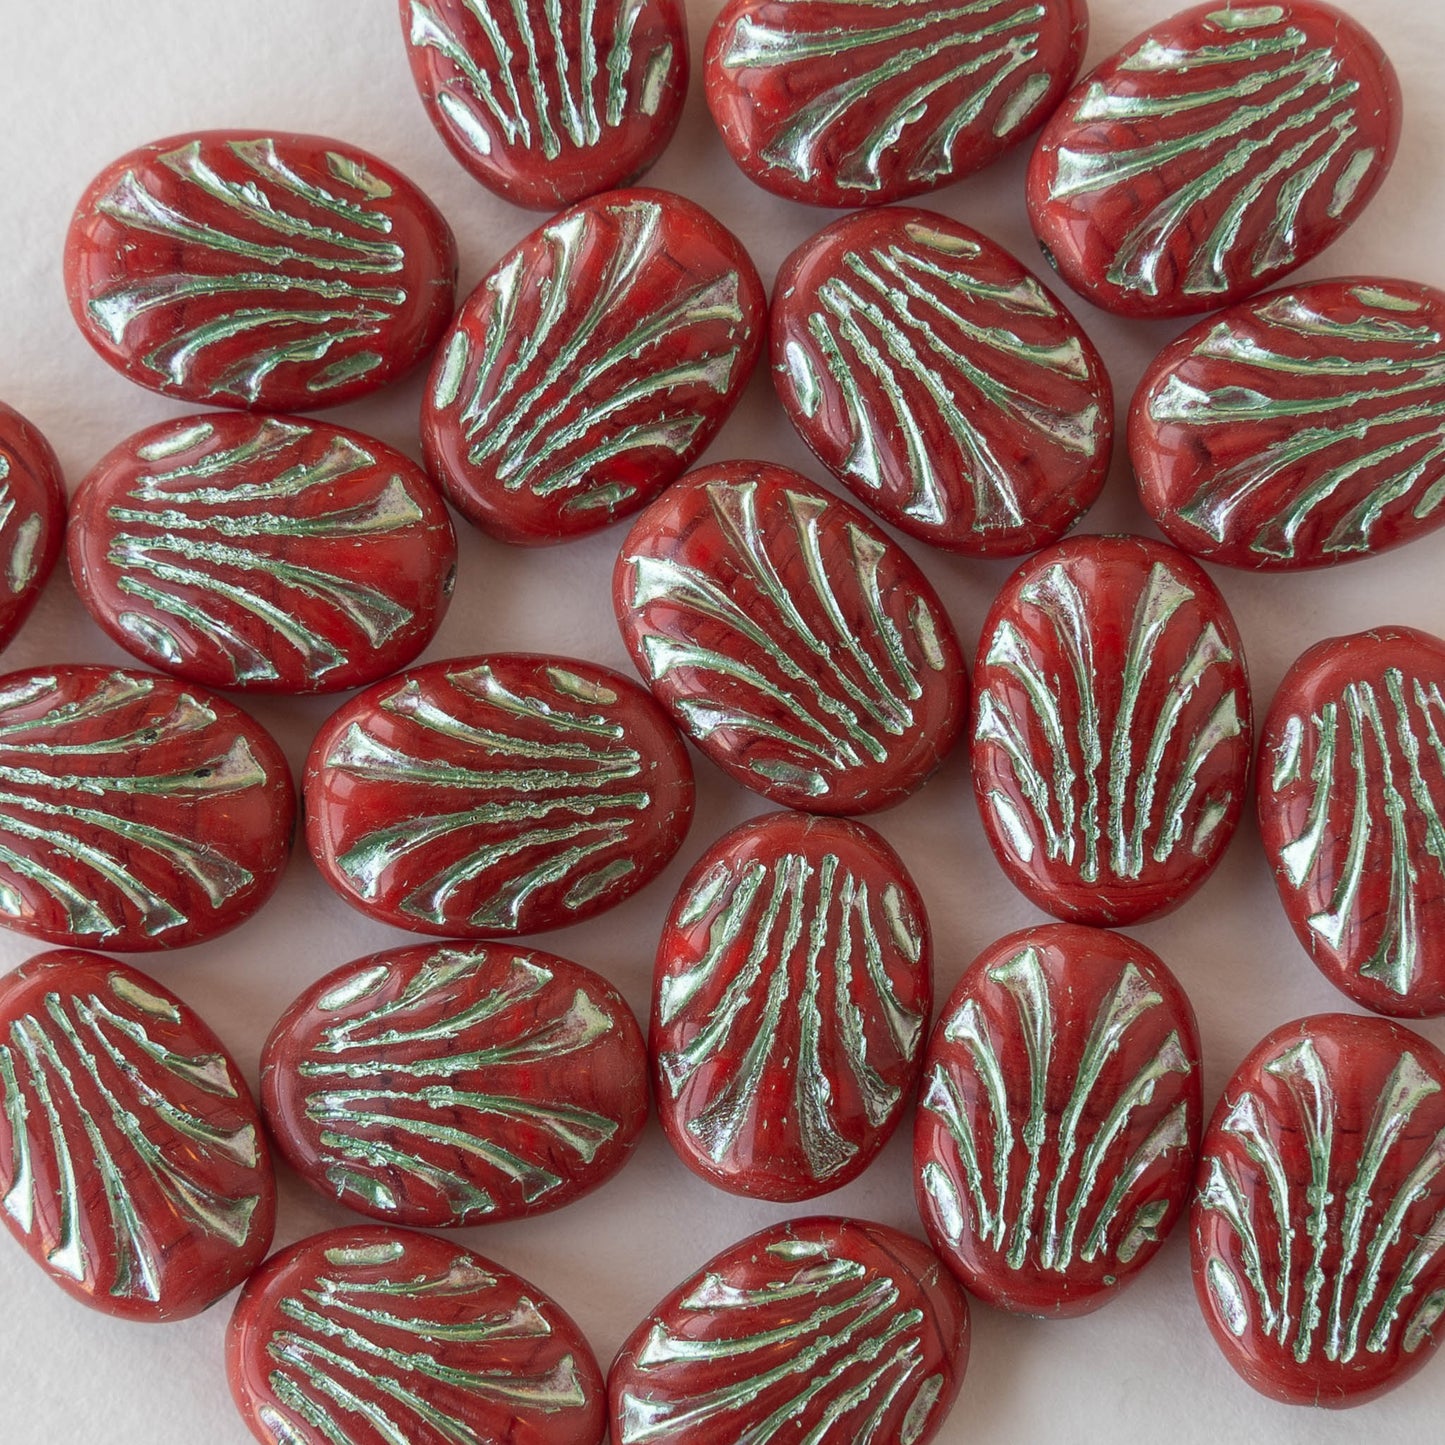 Oval Fan Art Deco Bead - Red with a Metallic Green Wash- 10 beads